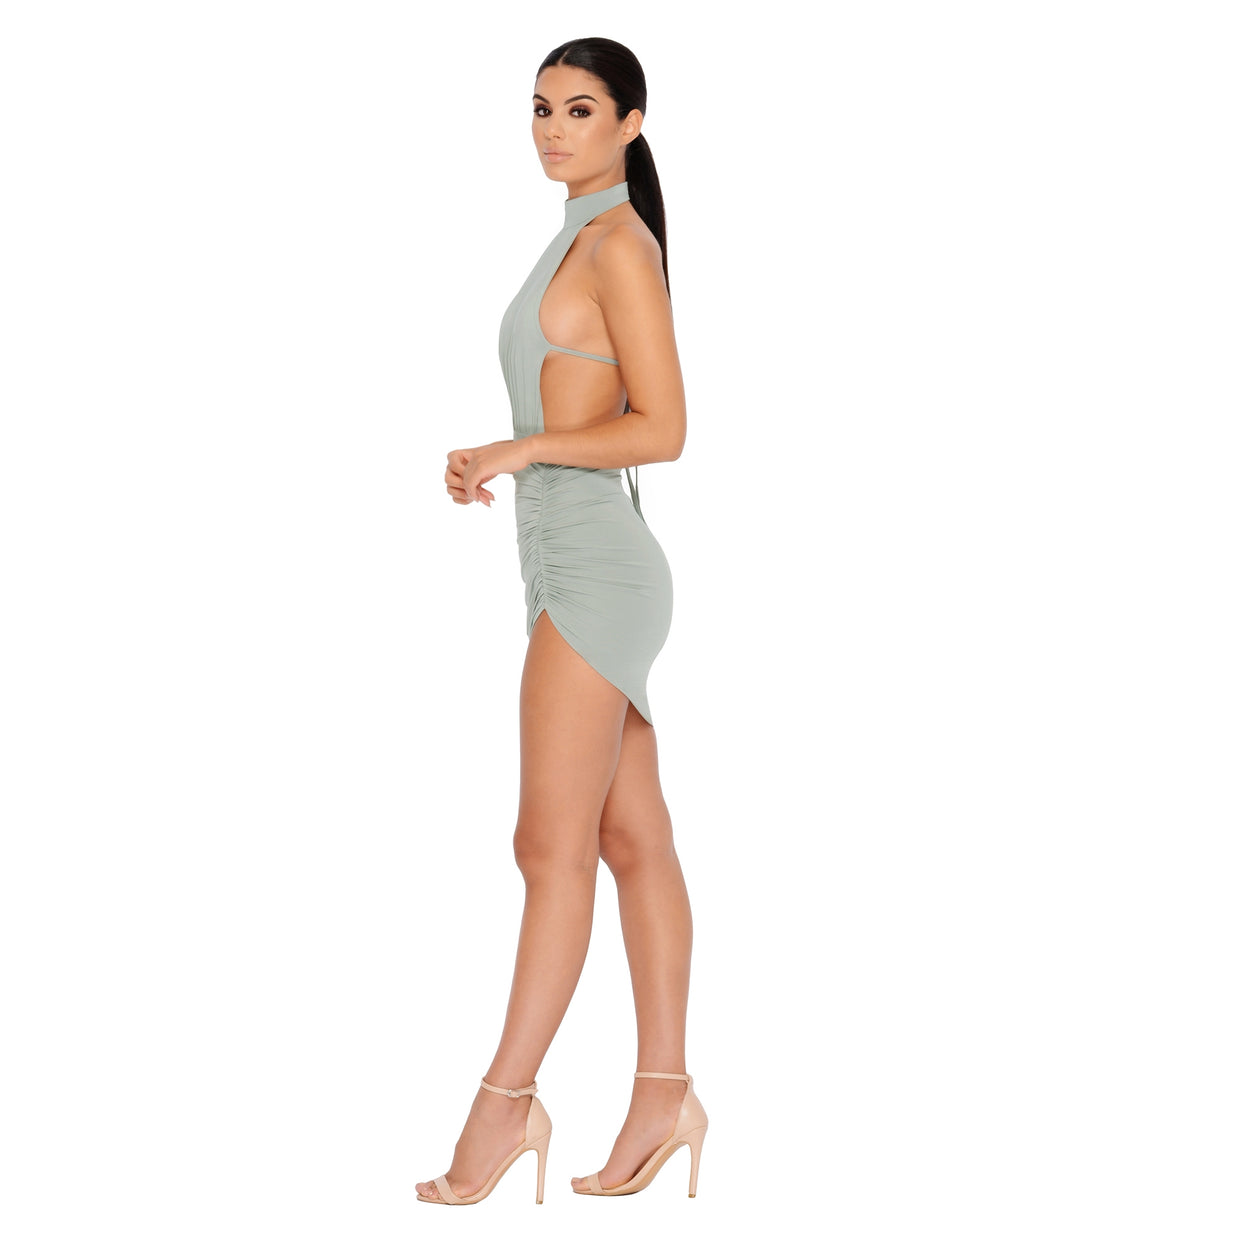 Ruched And Ready Asymmetric Halter Neck Mini Dress in Grey